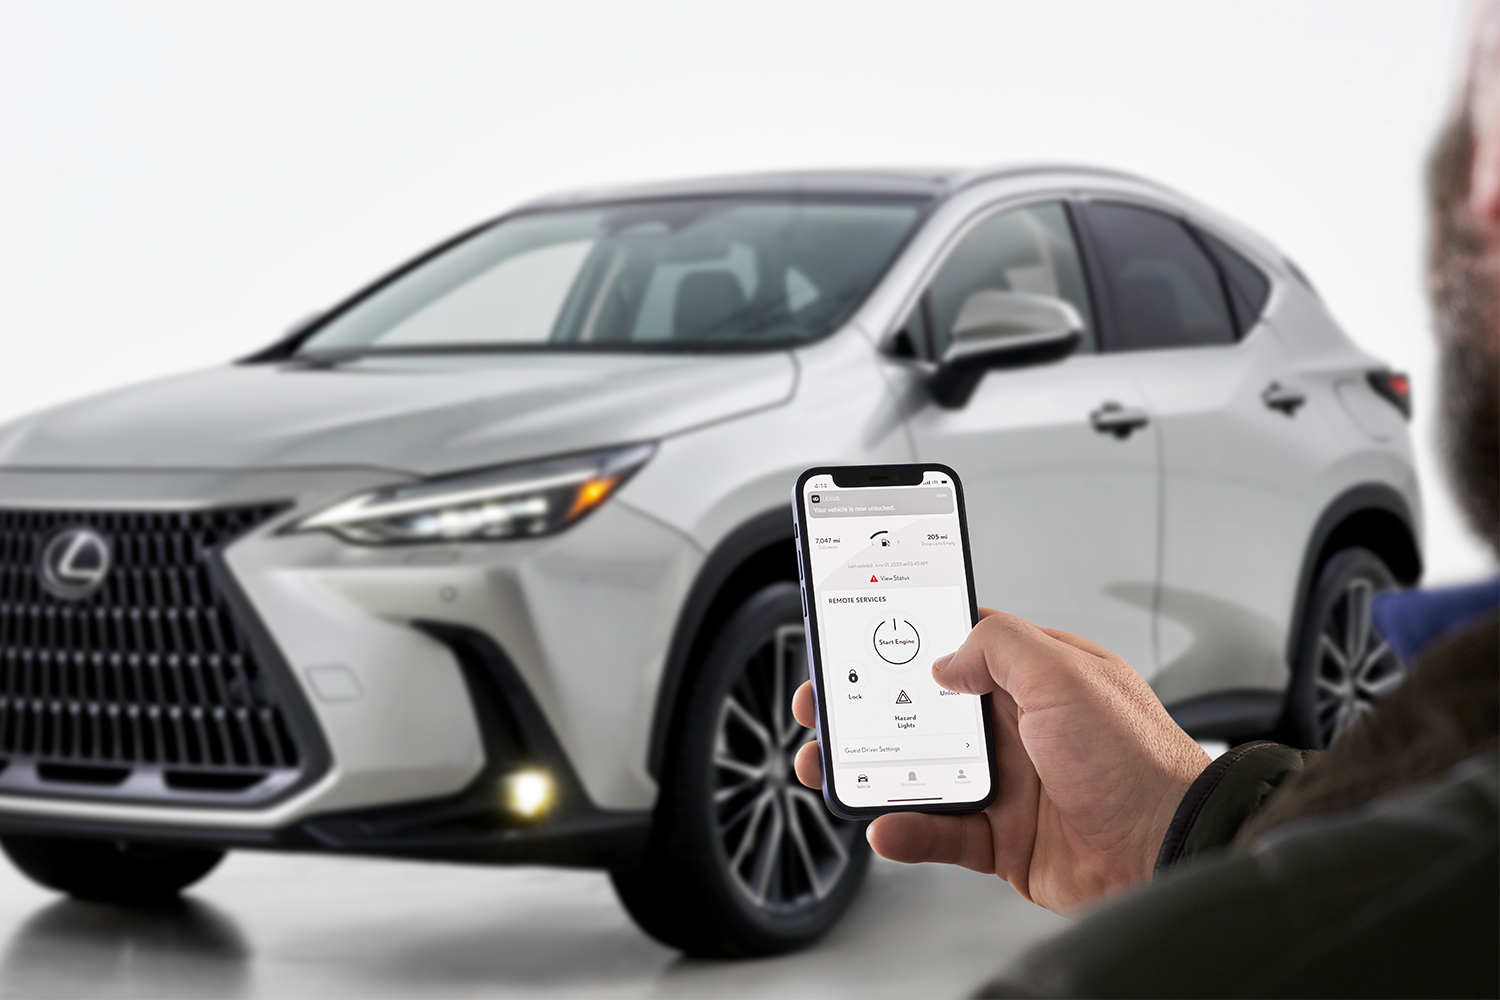 The digital key functionality shown on a smartphone for a Lexus vehicle (it's also available on Toyota cars)